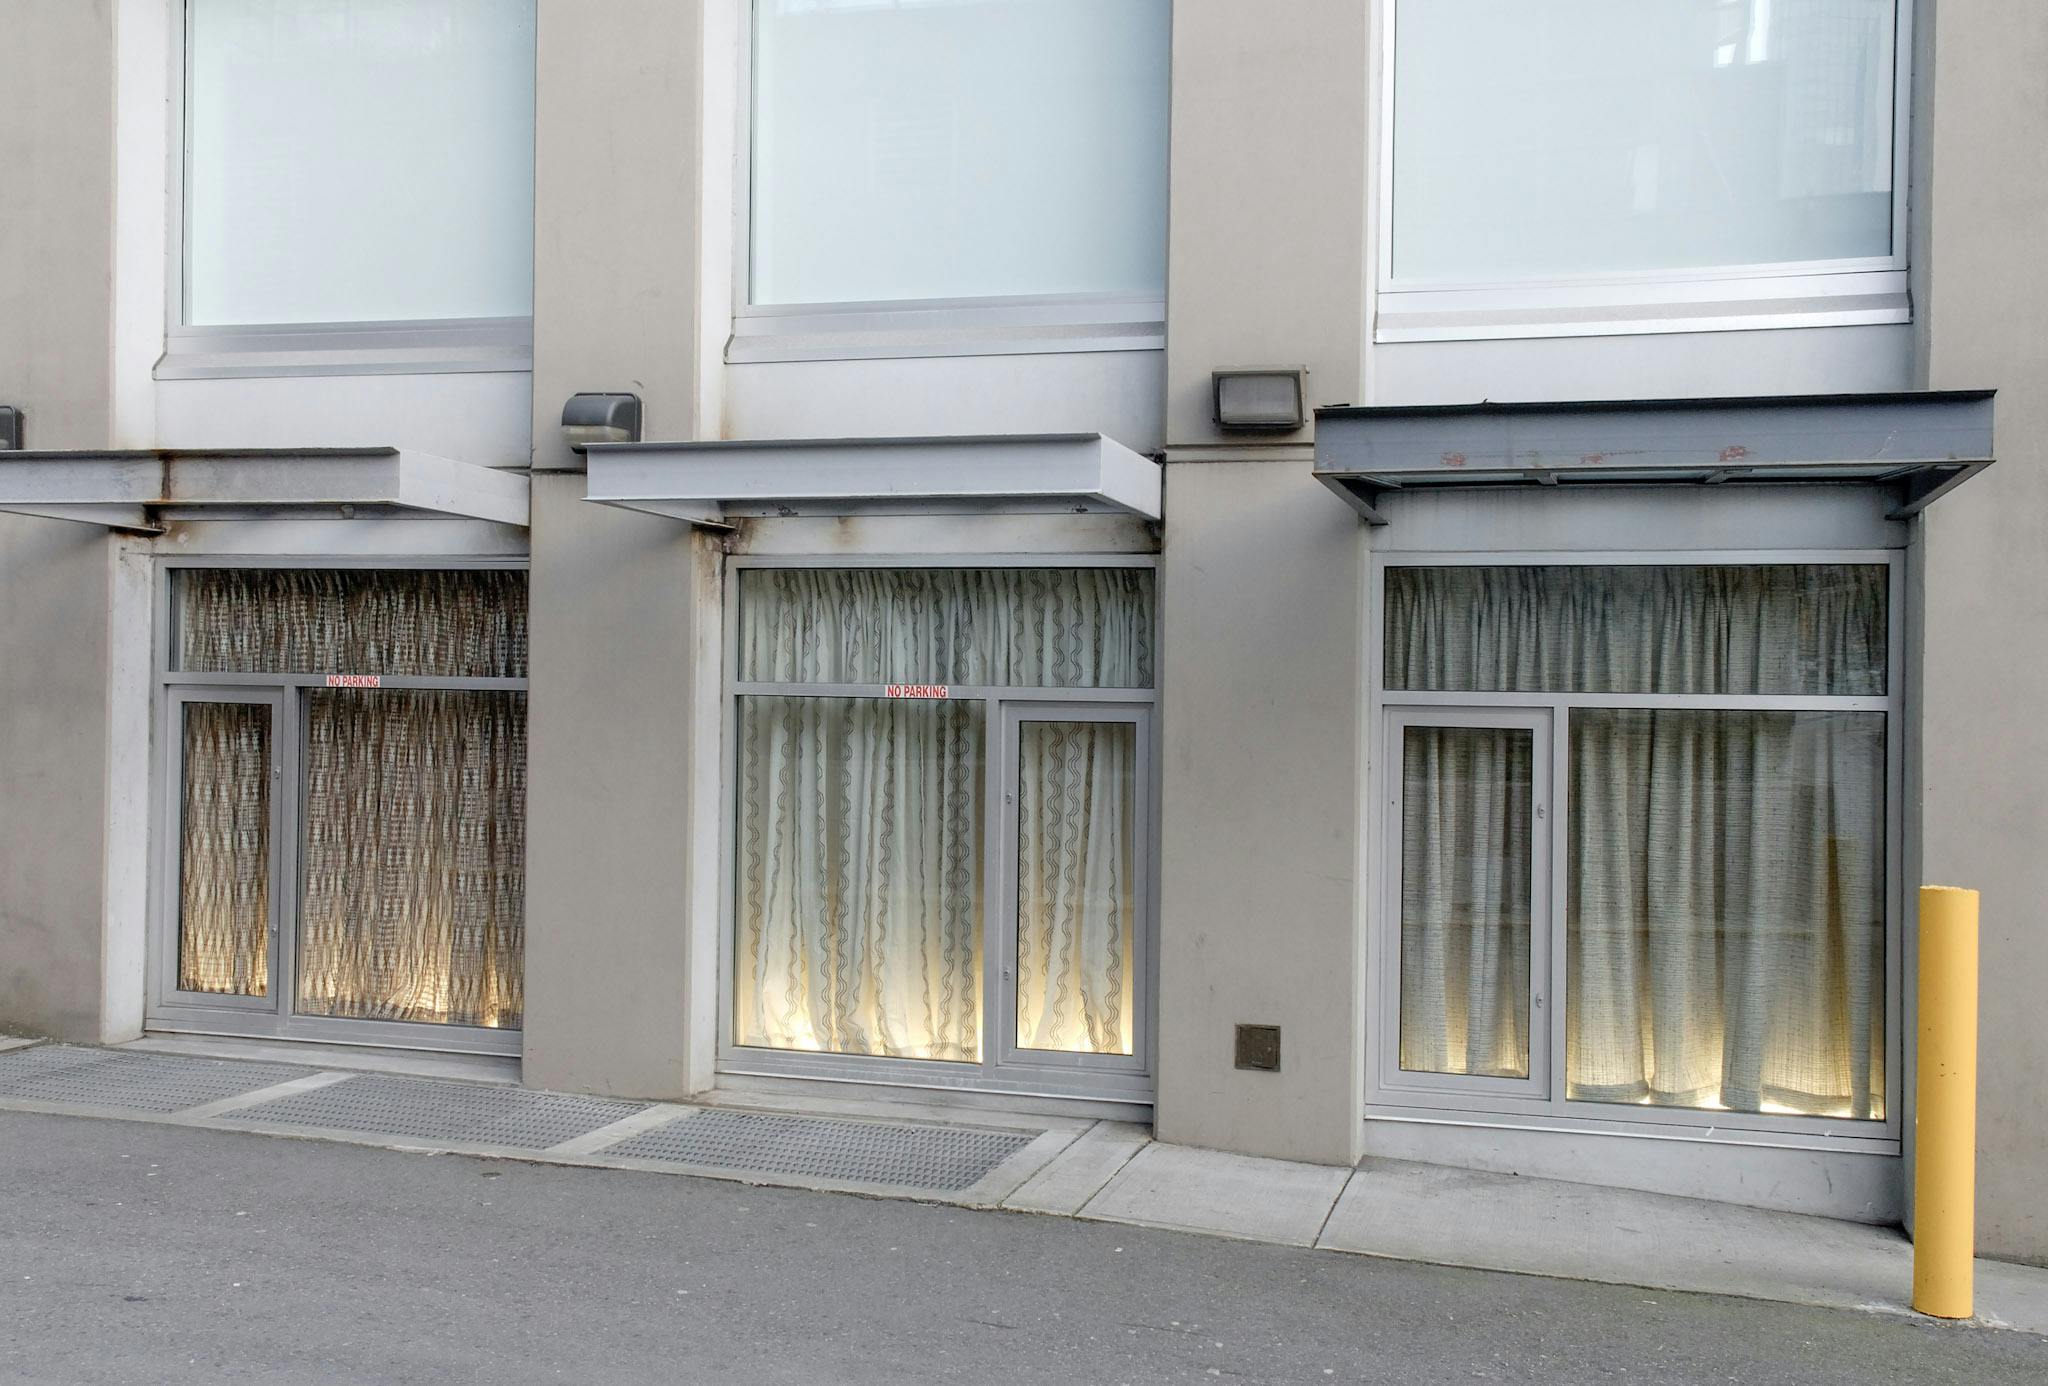 CAG’s window spaces are covered by the fabric installation by Derek Brunen. Each of two cream-coloured curtains and one brown curtain covers an entire window. 